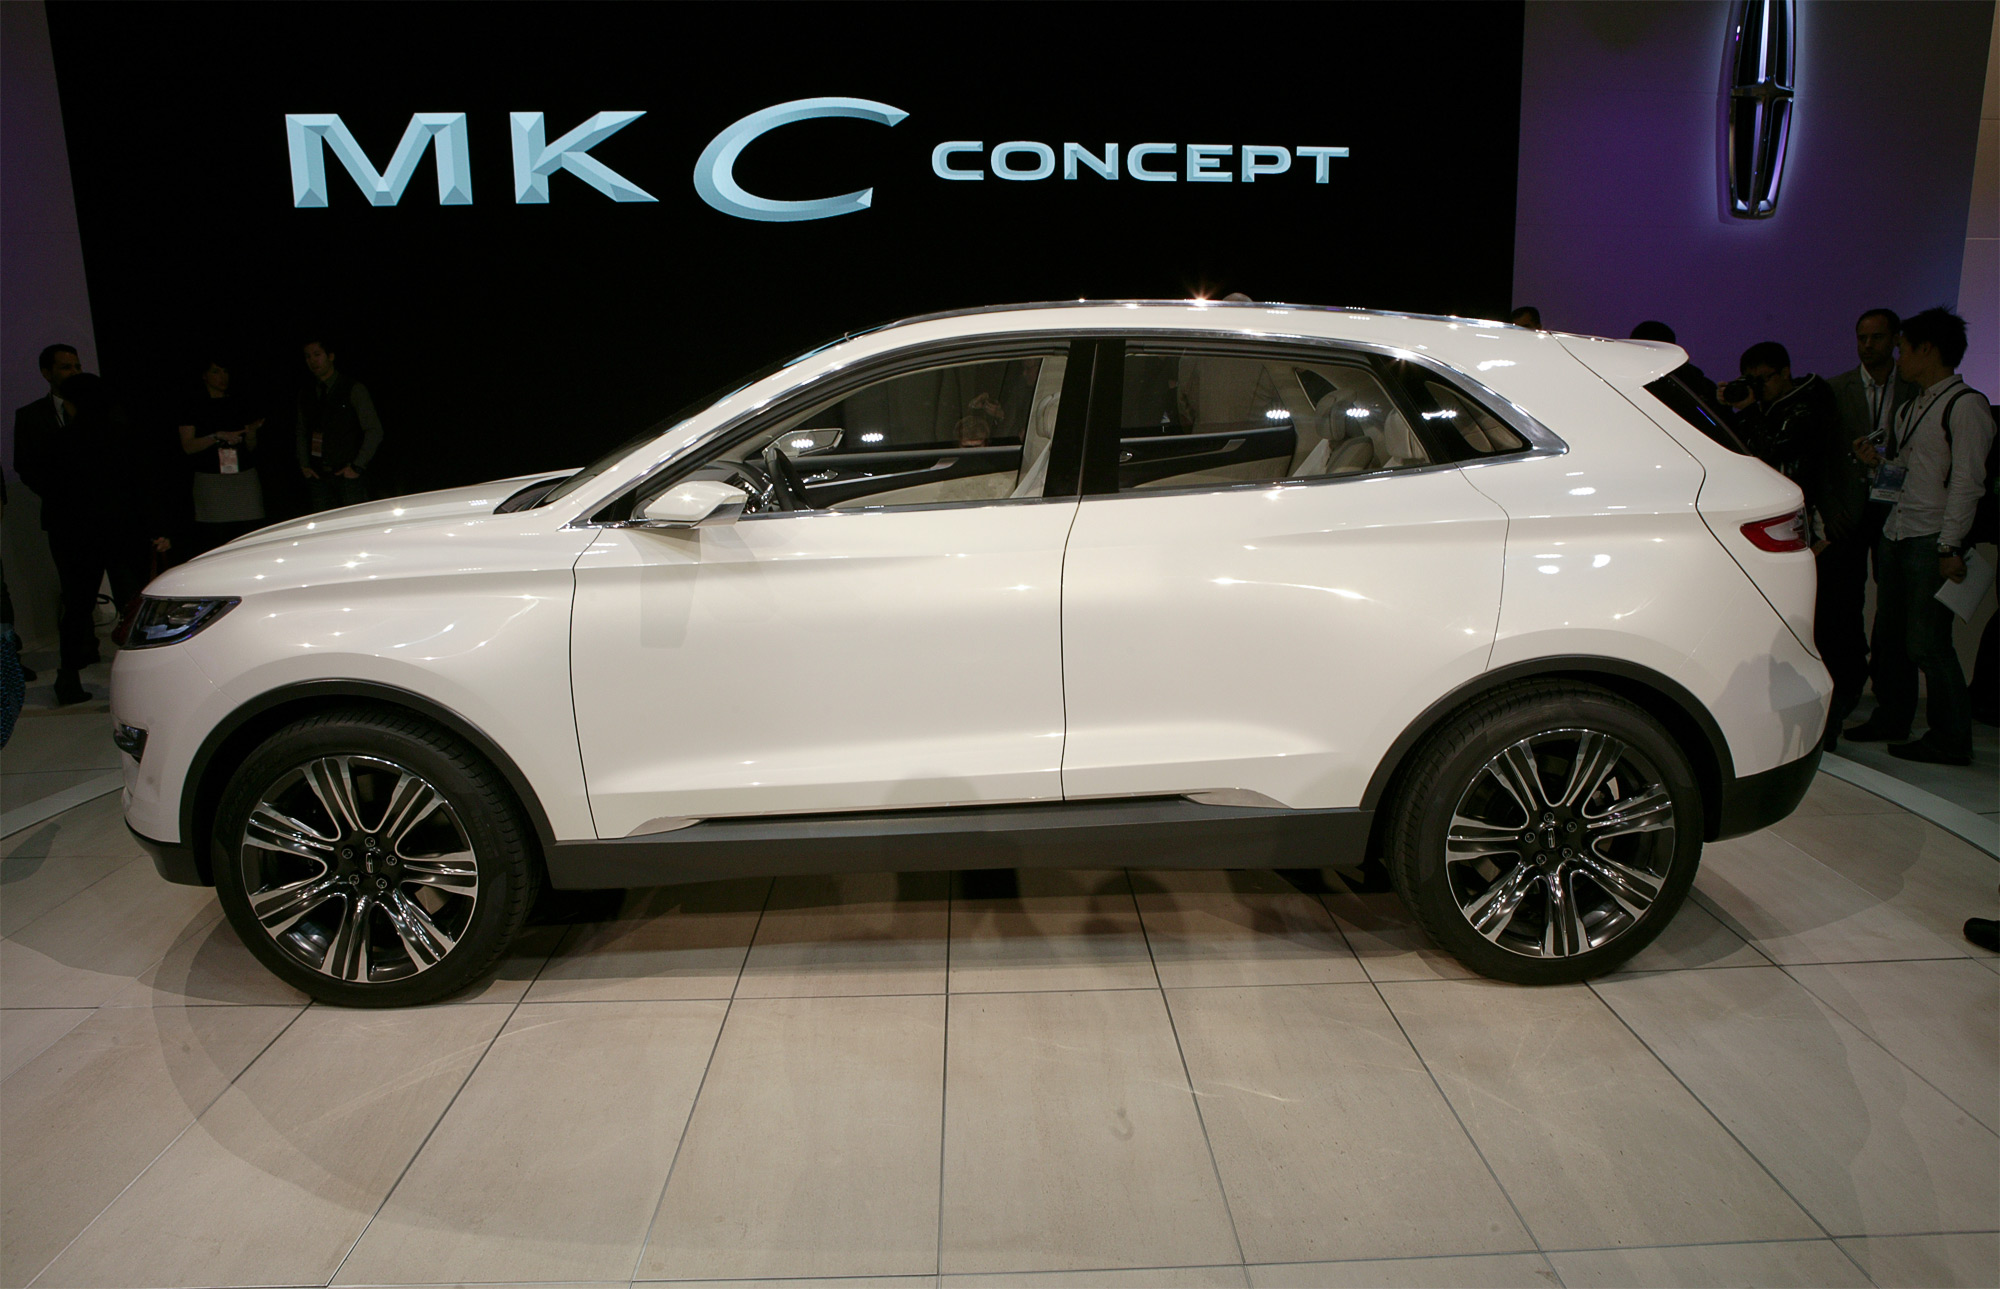 Nice Images Collection: Lincoln Mkc Concept Desktop Wallpapers